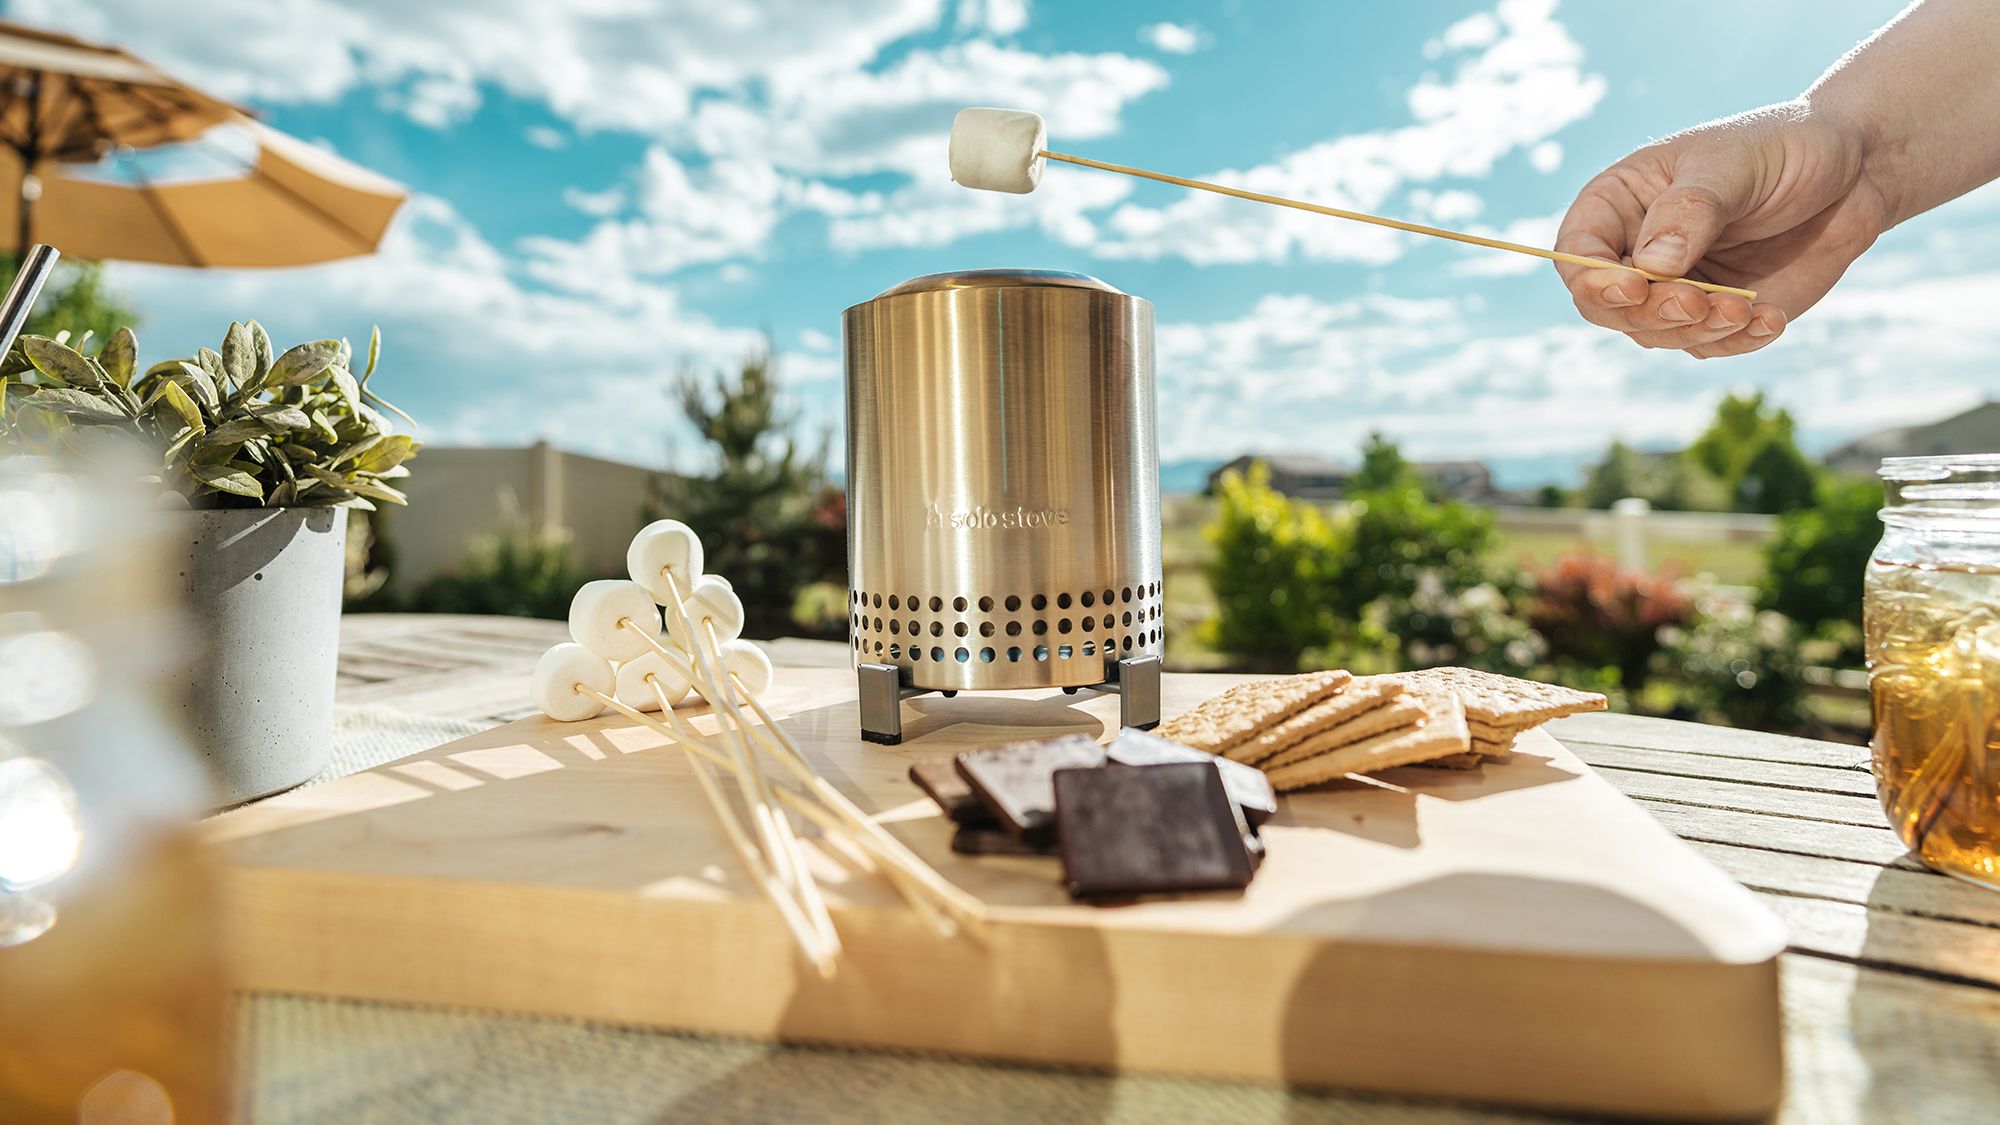 Solo Stove Mesa review: We tried the new tiny fire pit